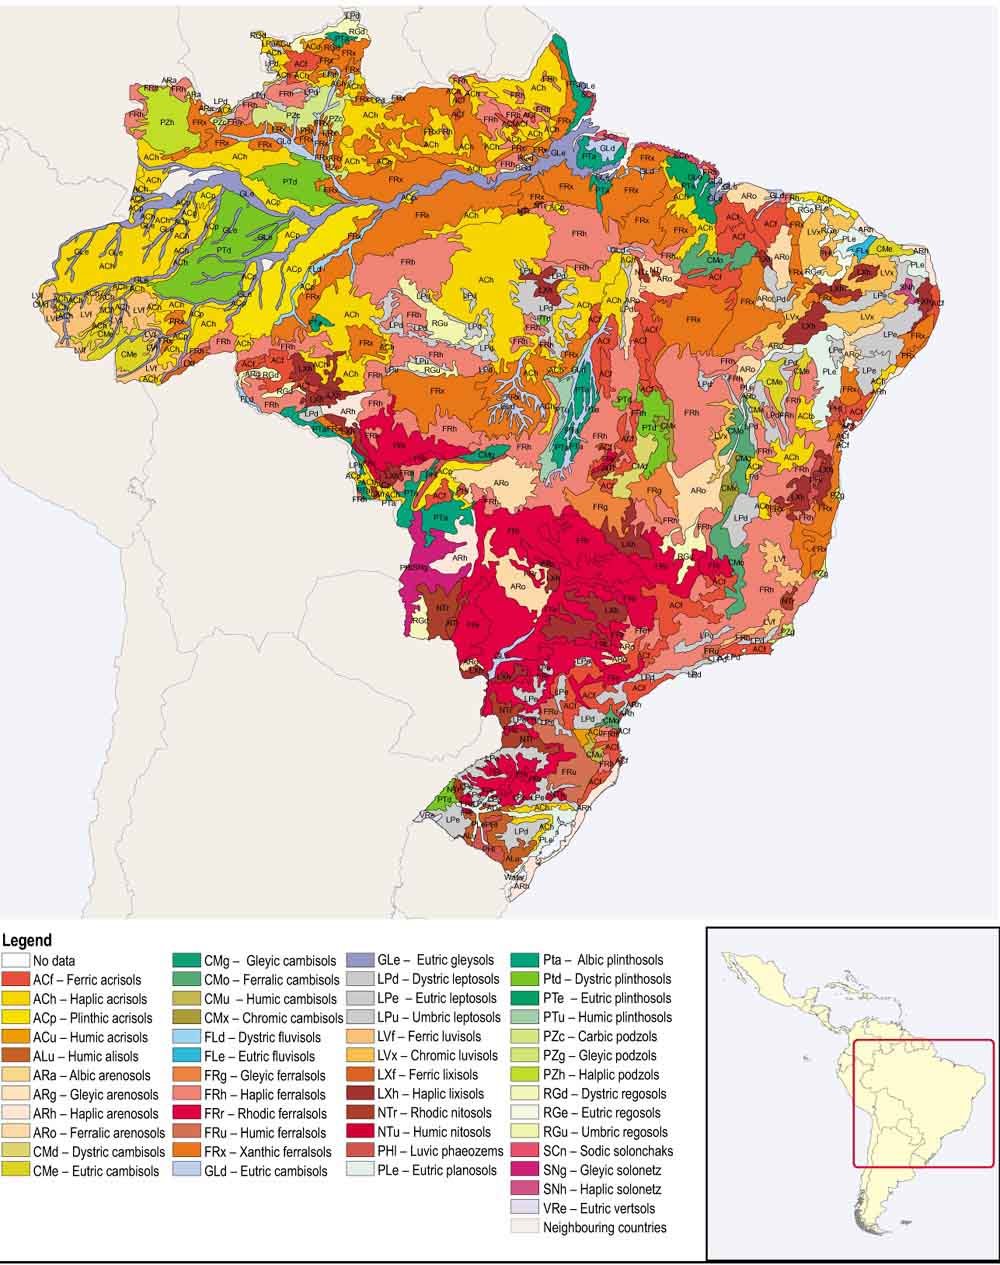 Dominant soils in Brazil. Source: Soils and terrain database for Latin America and the Caribbean, FAO-ISRIC-UNEP, 1998. FAO-GIS Jan. 2004